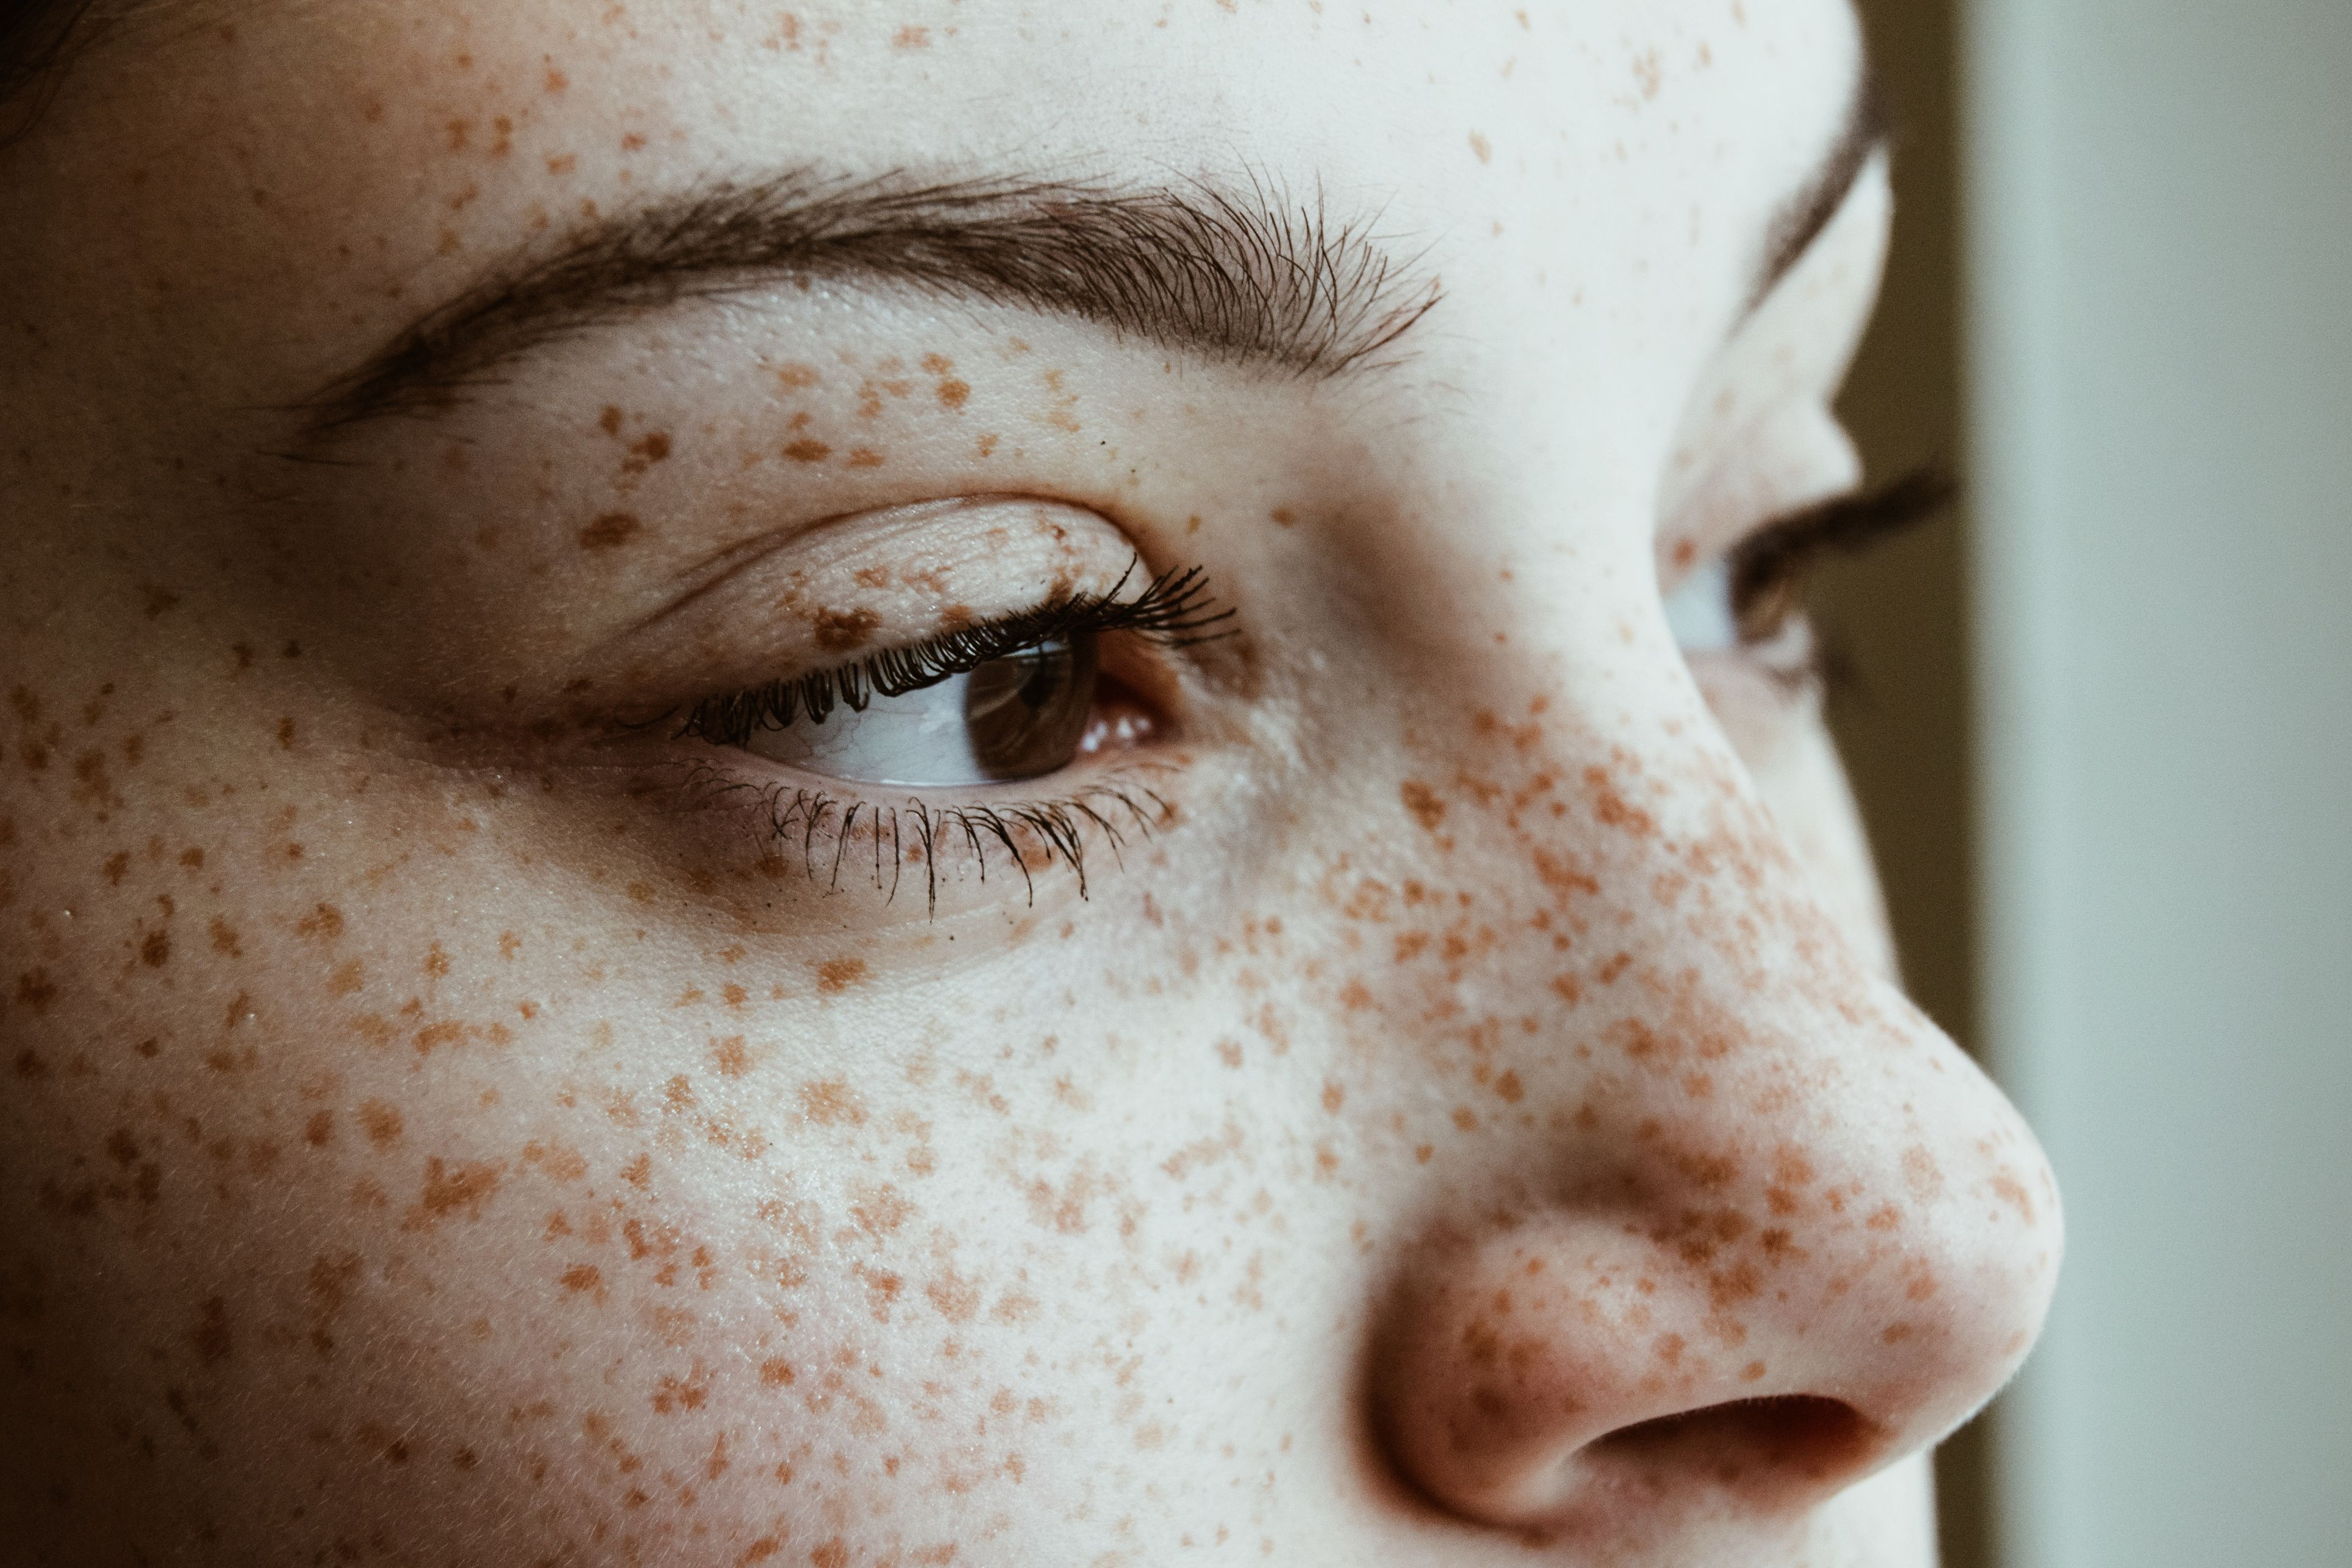 https://hips.hearstapps.com/hmg-prod/images/close-up-of-thoughtful-woman-with-freckles-on-face-royalty-free-image-909084260-1542217047.jpg